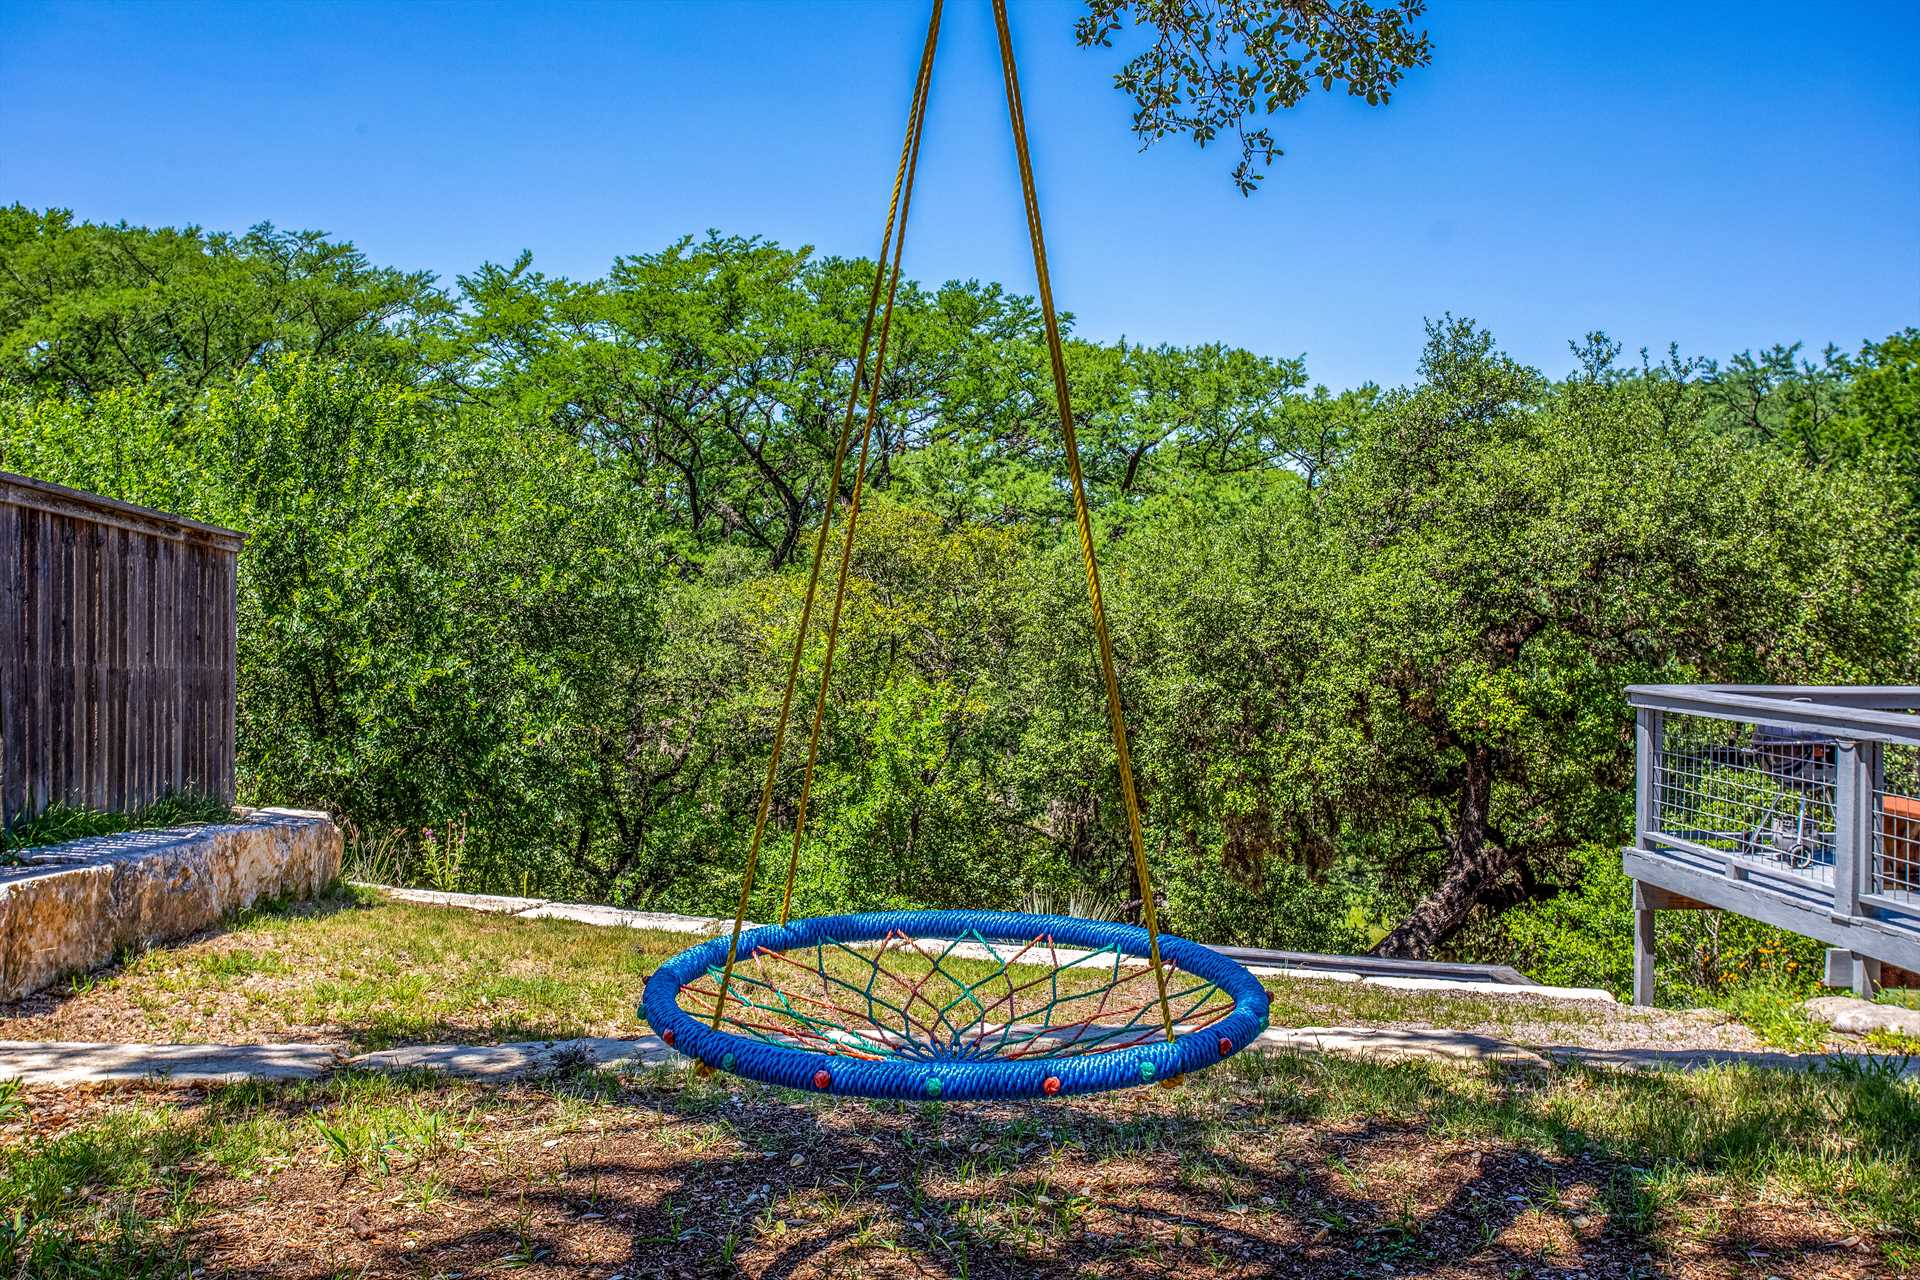                                                 It's not quite a tire swing, it's not quite a hammock...but it's a fun way to relax in the shade!